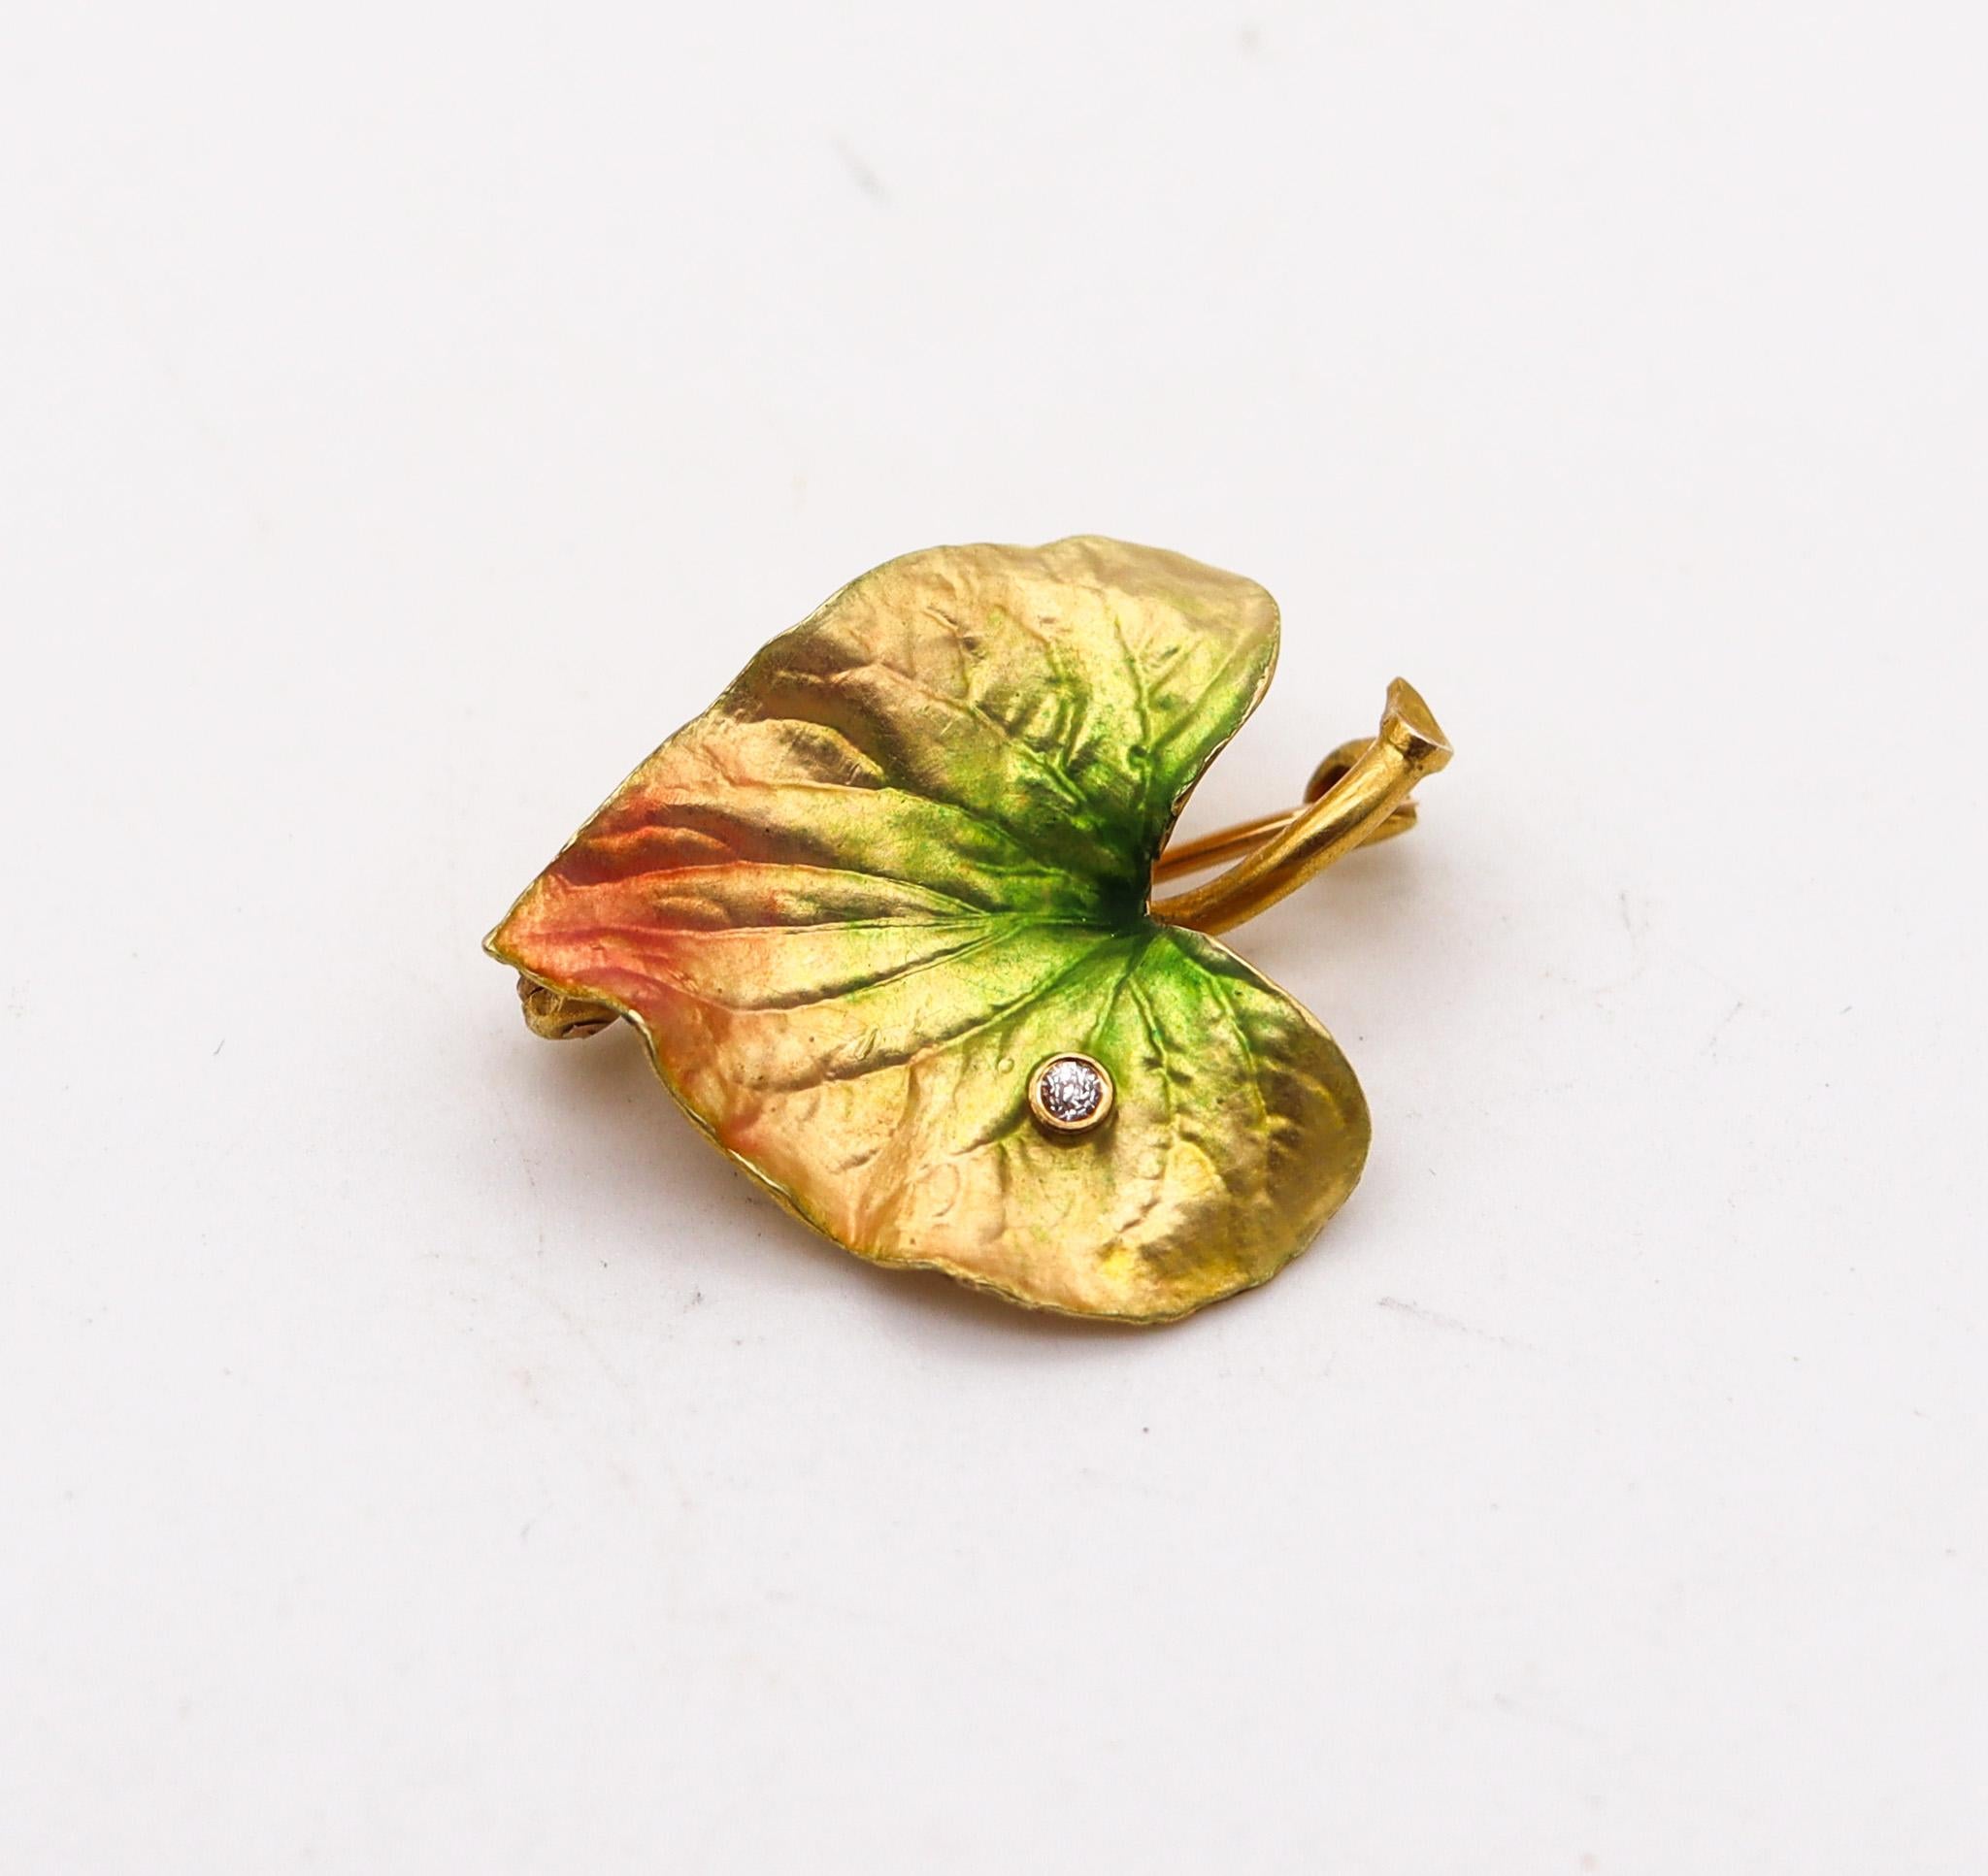 Art nouveau enamel leaf  brooch designed by Crane & Theurer Co..

Colorful little brooch, created in Newark United States during the Edwardian and the Art Nouveau periods, back in the 1900. This brooch has been carefully crafted by the Crane &